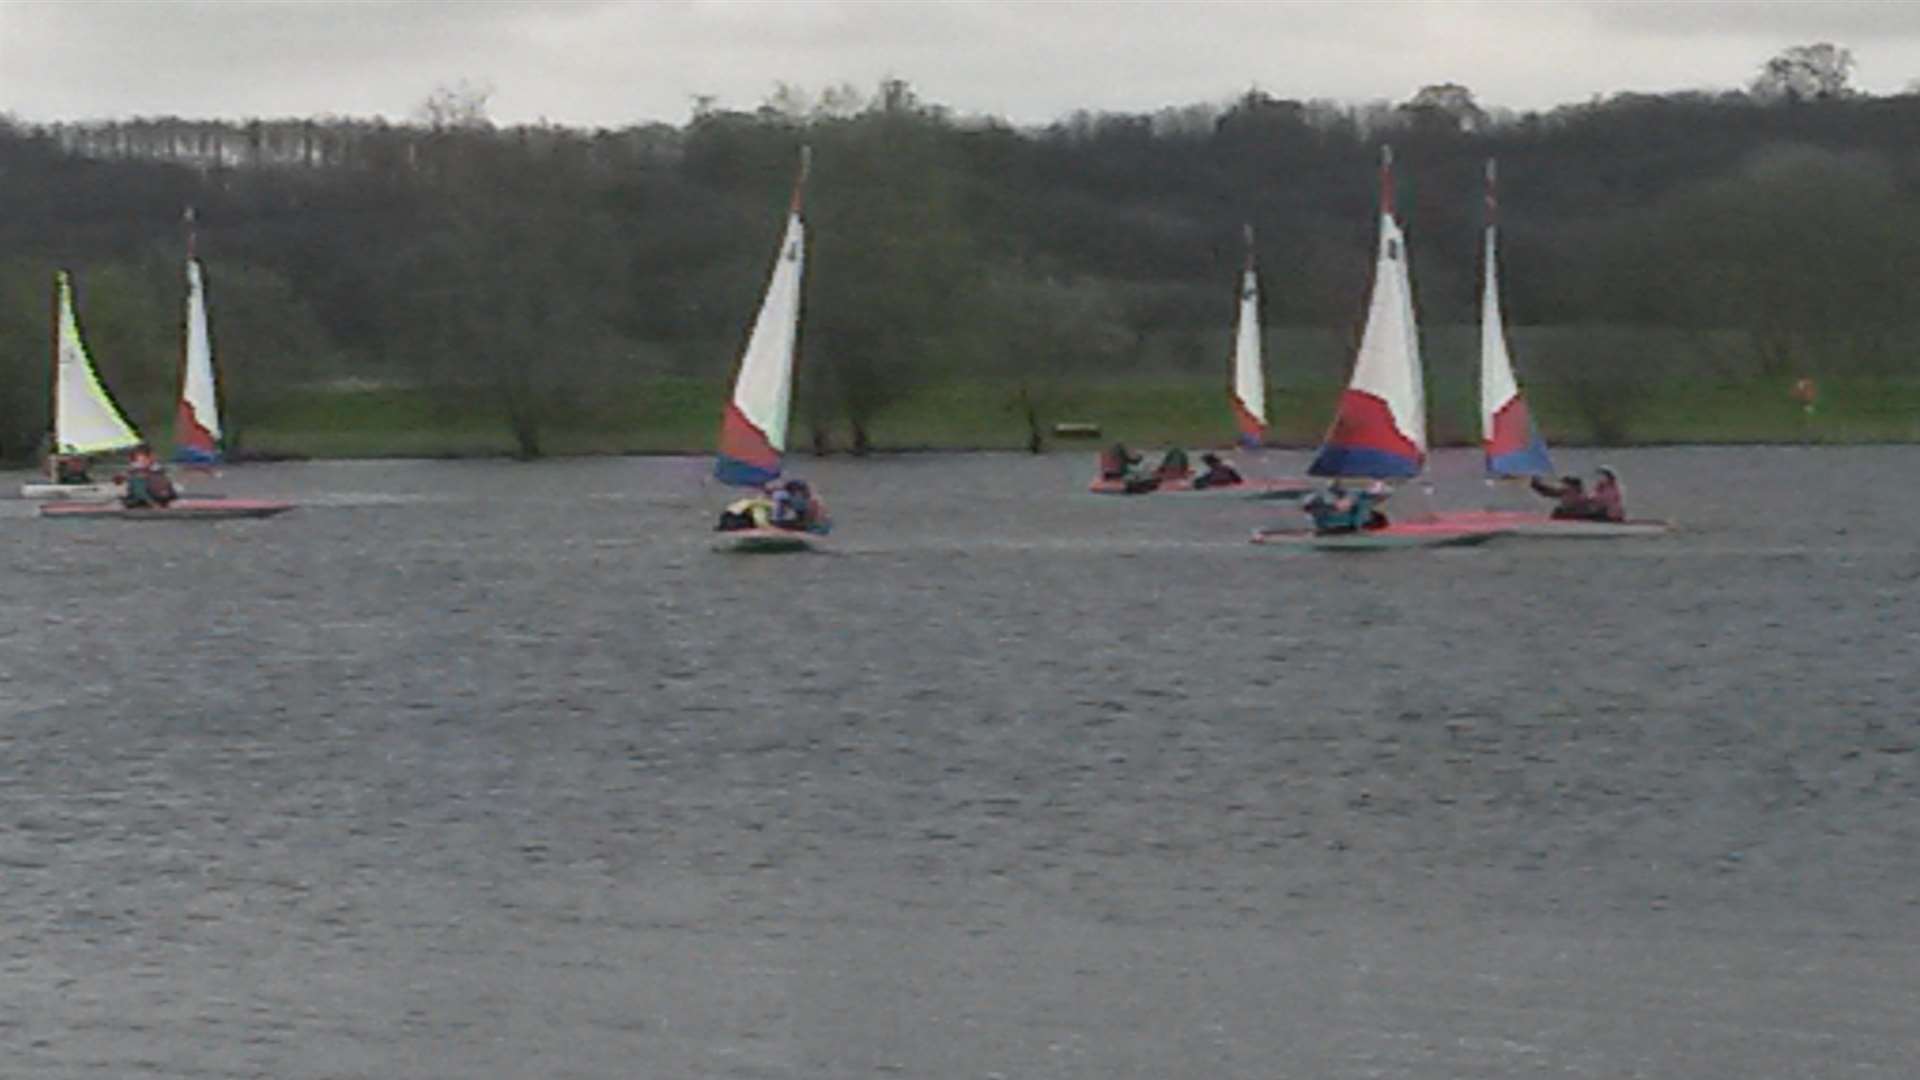 Young people from 1st Shadoxhurst Scout Groups went sailing at Conningbrook Lakes